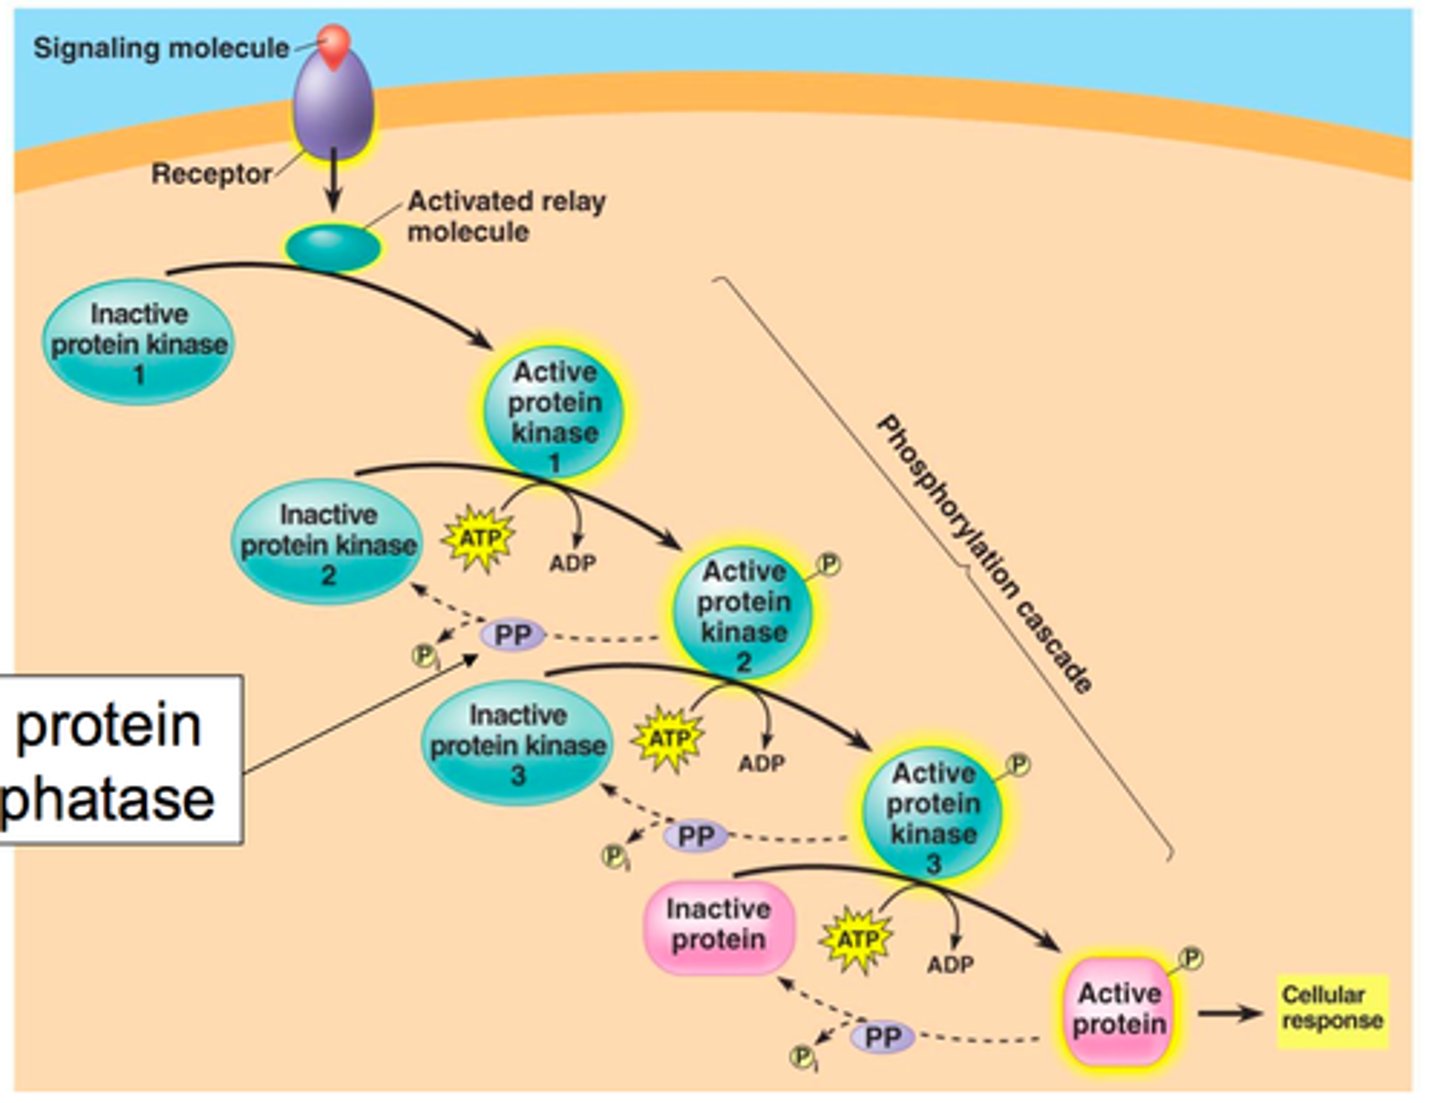 <p>A series of enzyme-catalyzed phosphorylation reactions commonly used in signal transduction pathways to amplify and convey a signal inward from the plasma membrane.</p>